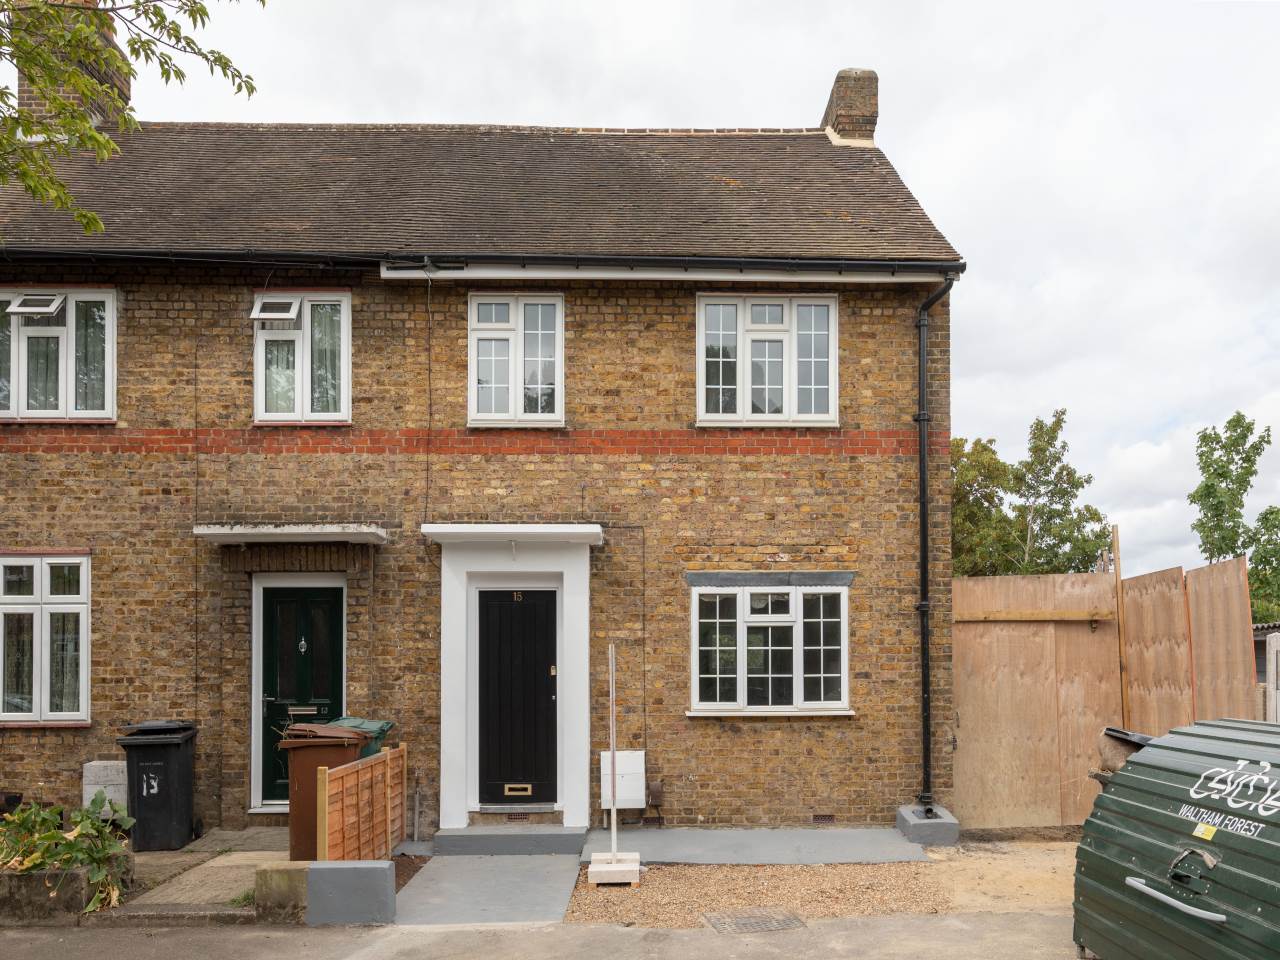 3 bed house for sale in Lewis Avenue, Walthamstow - Property Image 1